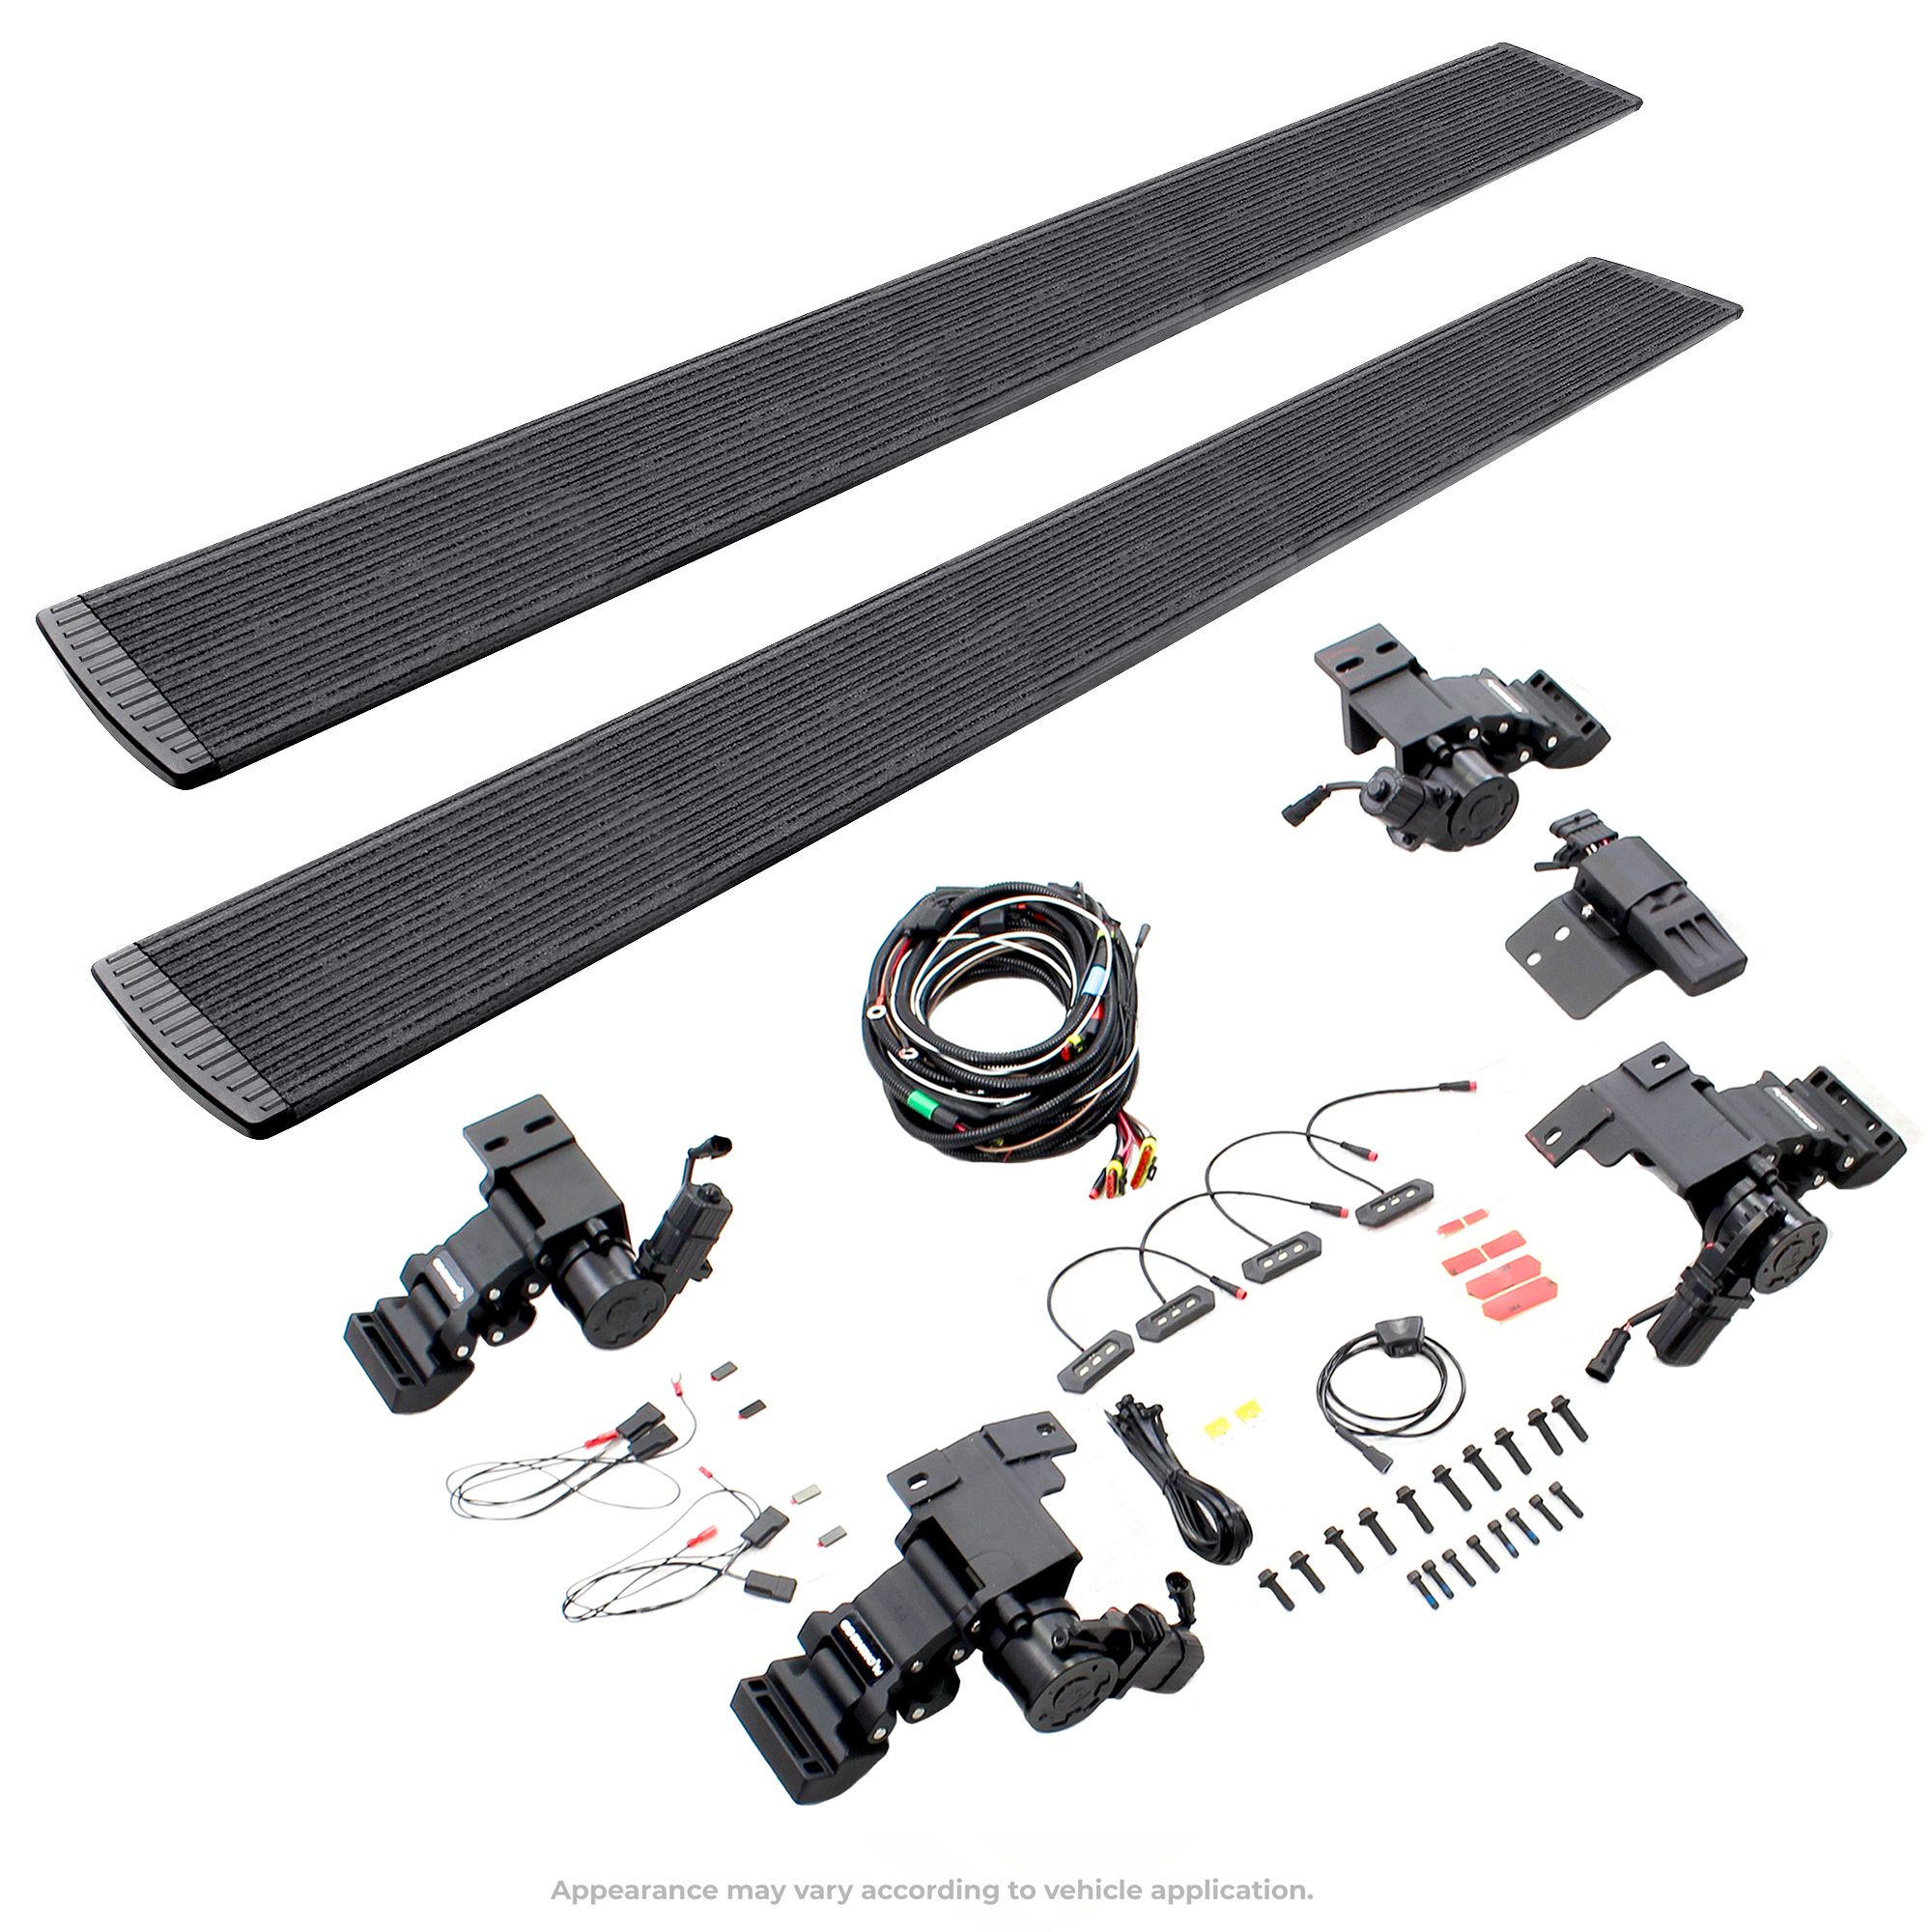 Go Rhino 20420687T - E1 Electric Running Boards With Mounting Brackets - Protective Bedliner Coating